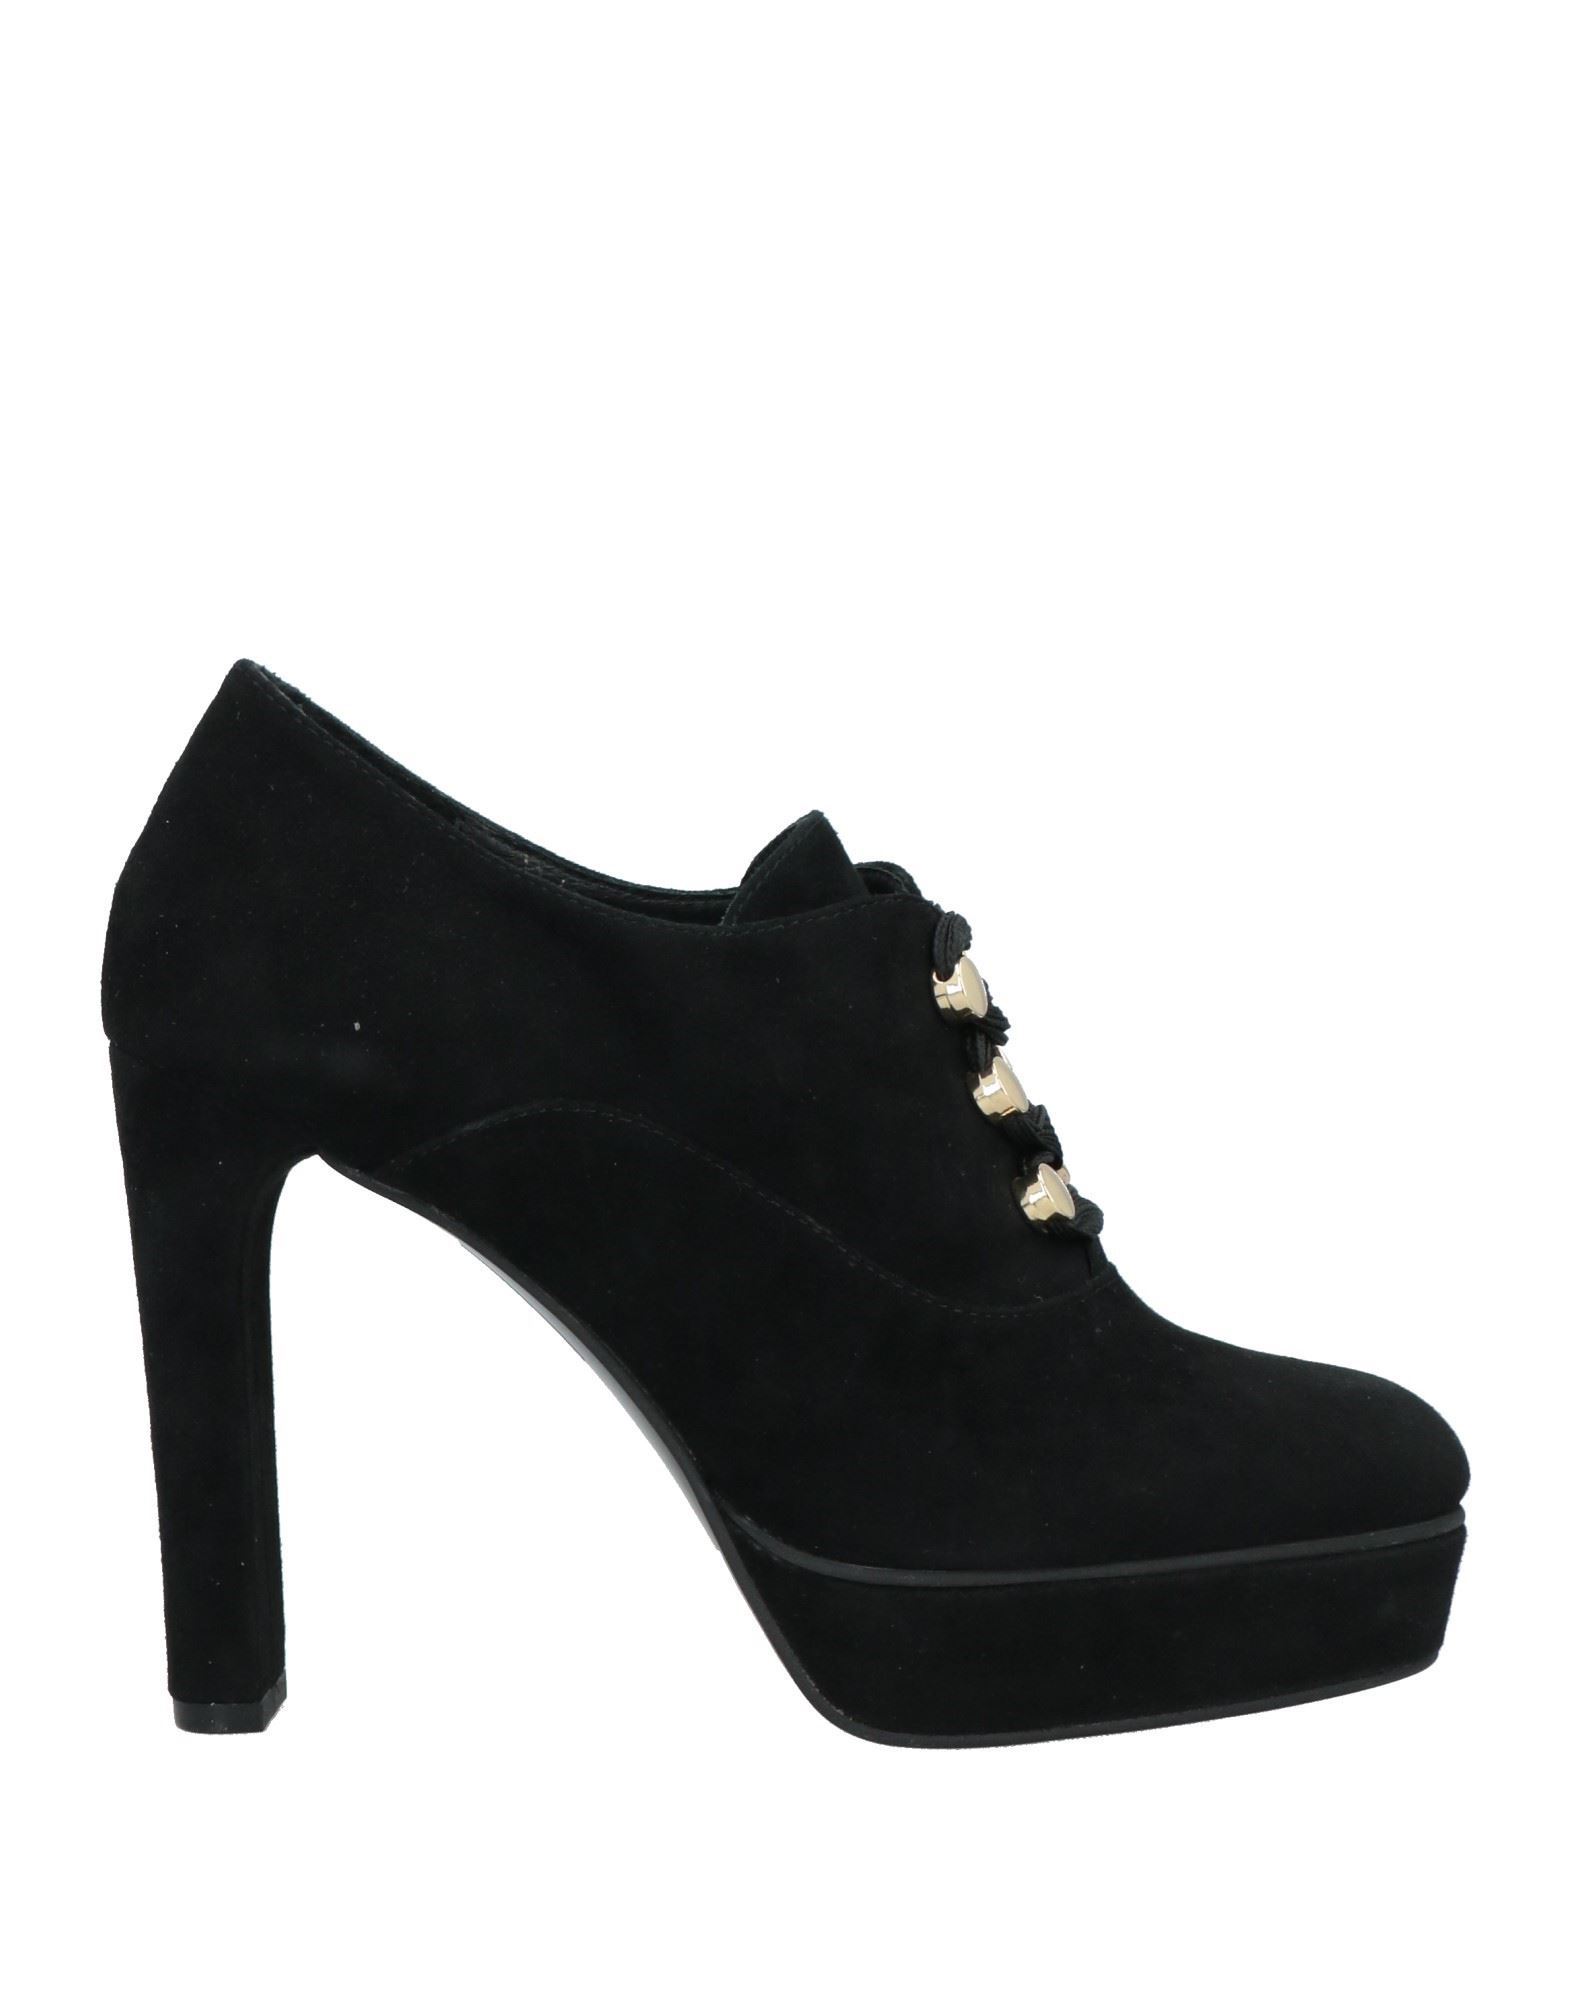 Adele Dezotti Lace-up Shoes In Black